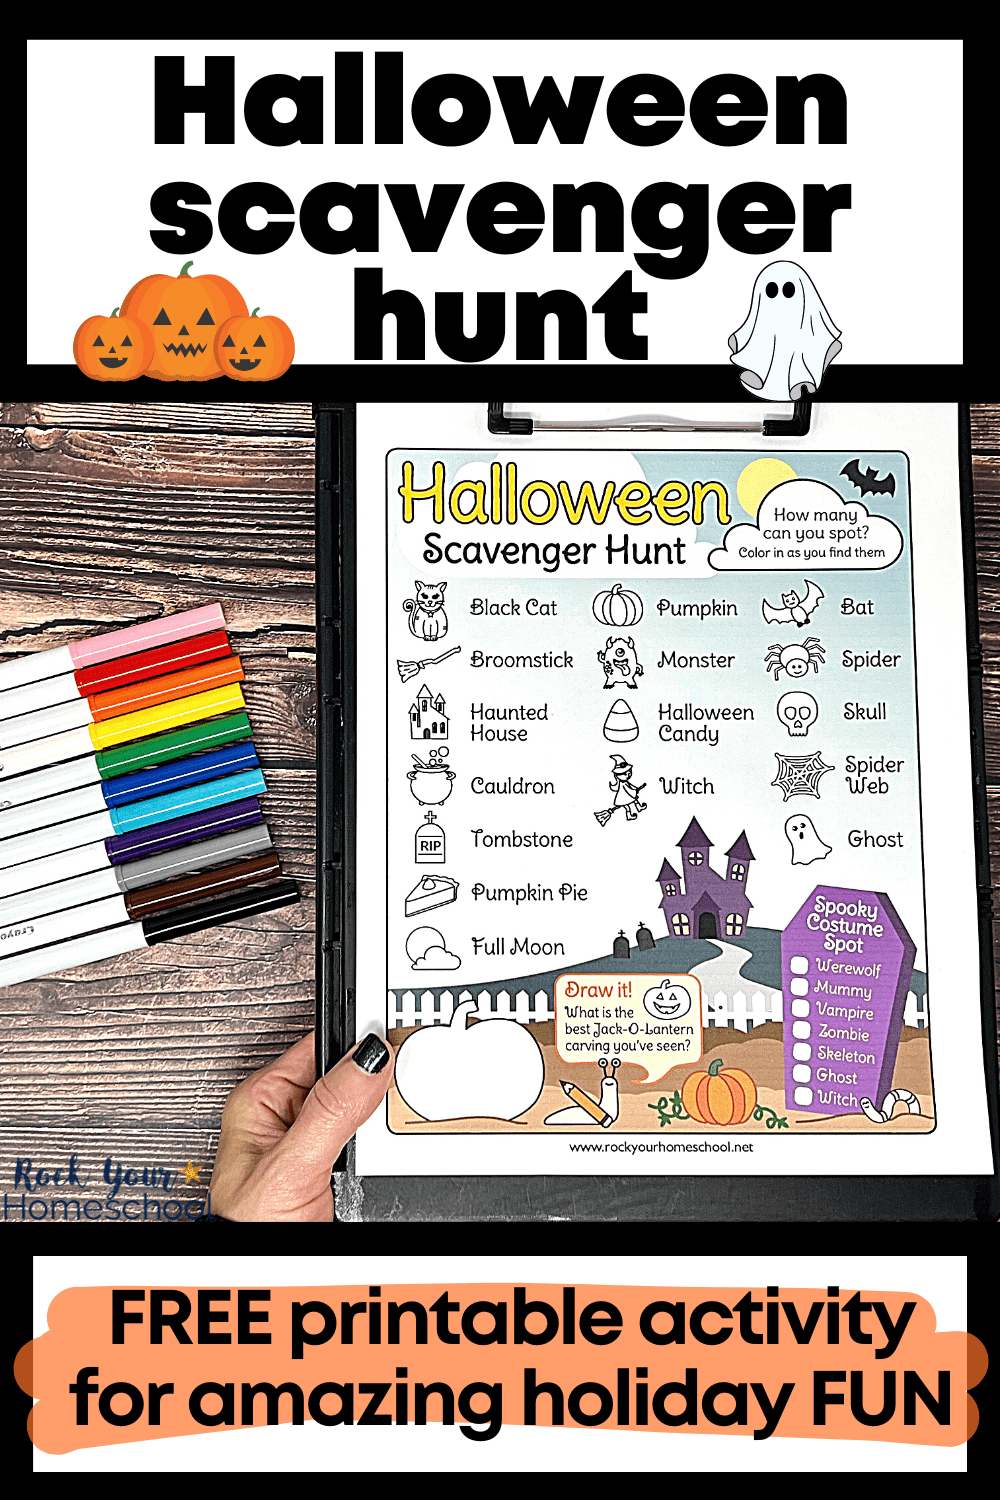 Halloween Scavenger Hunt for a Fun Holiday Activity for Kids (Free)